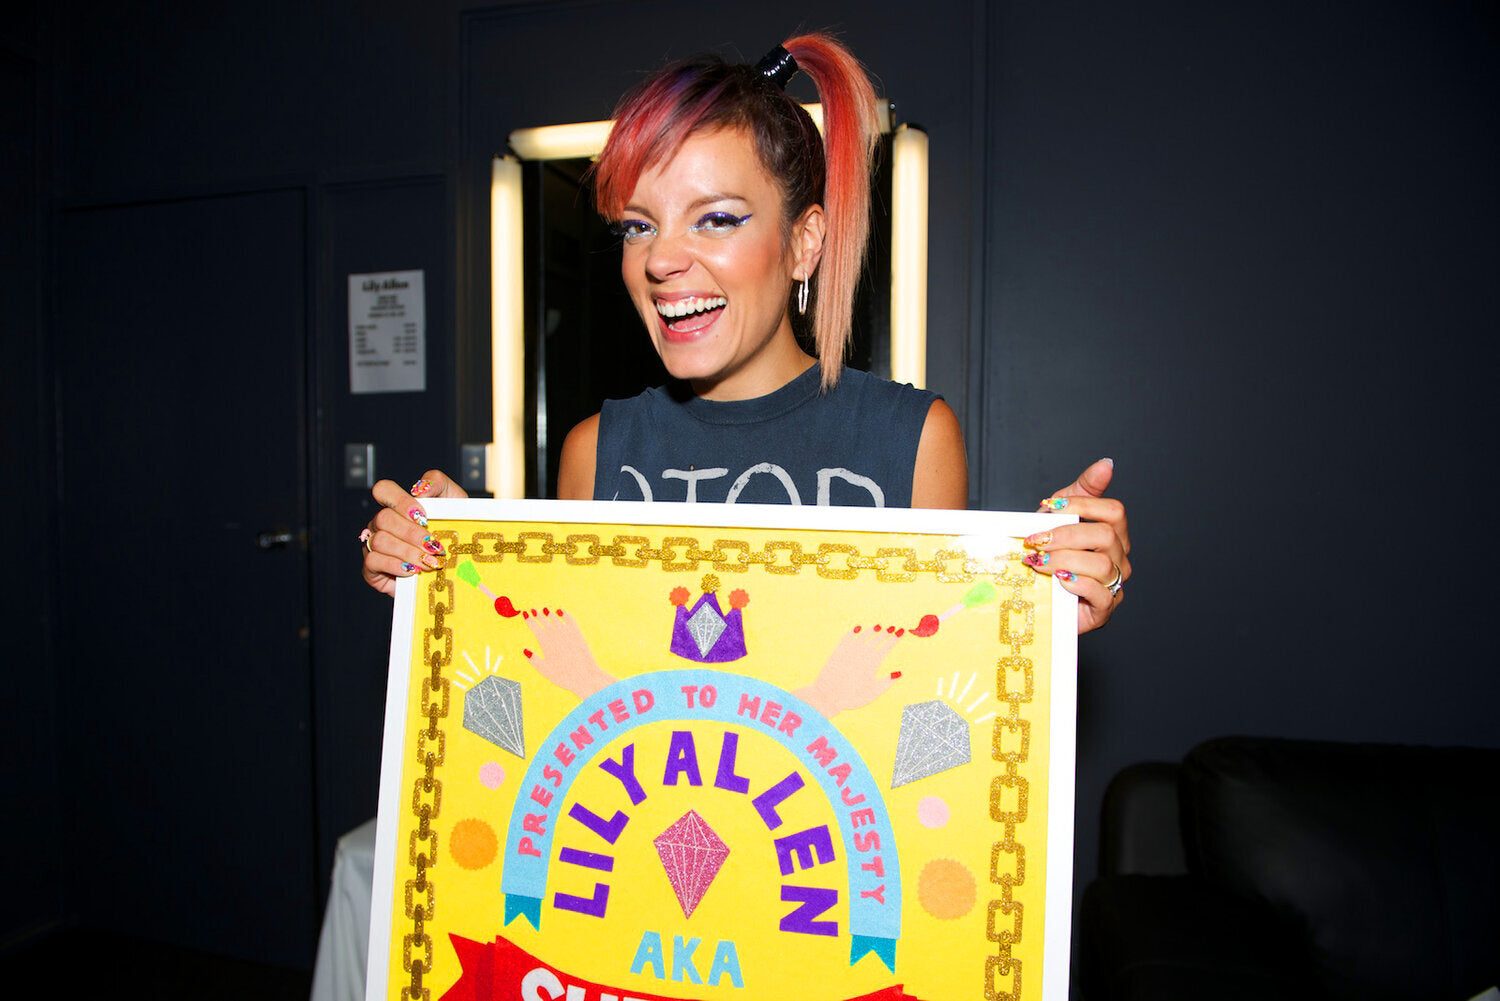 The pop singer Lily Allen smiles at the camera, holding a colourful felt collaged artwork with a yellow background, and colourful motifs and words.